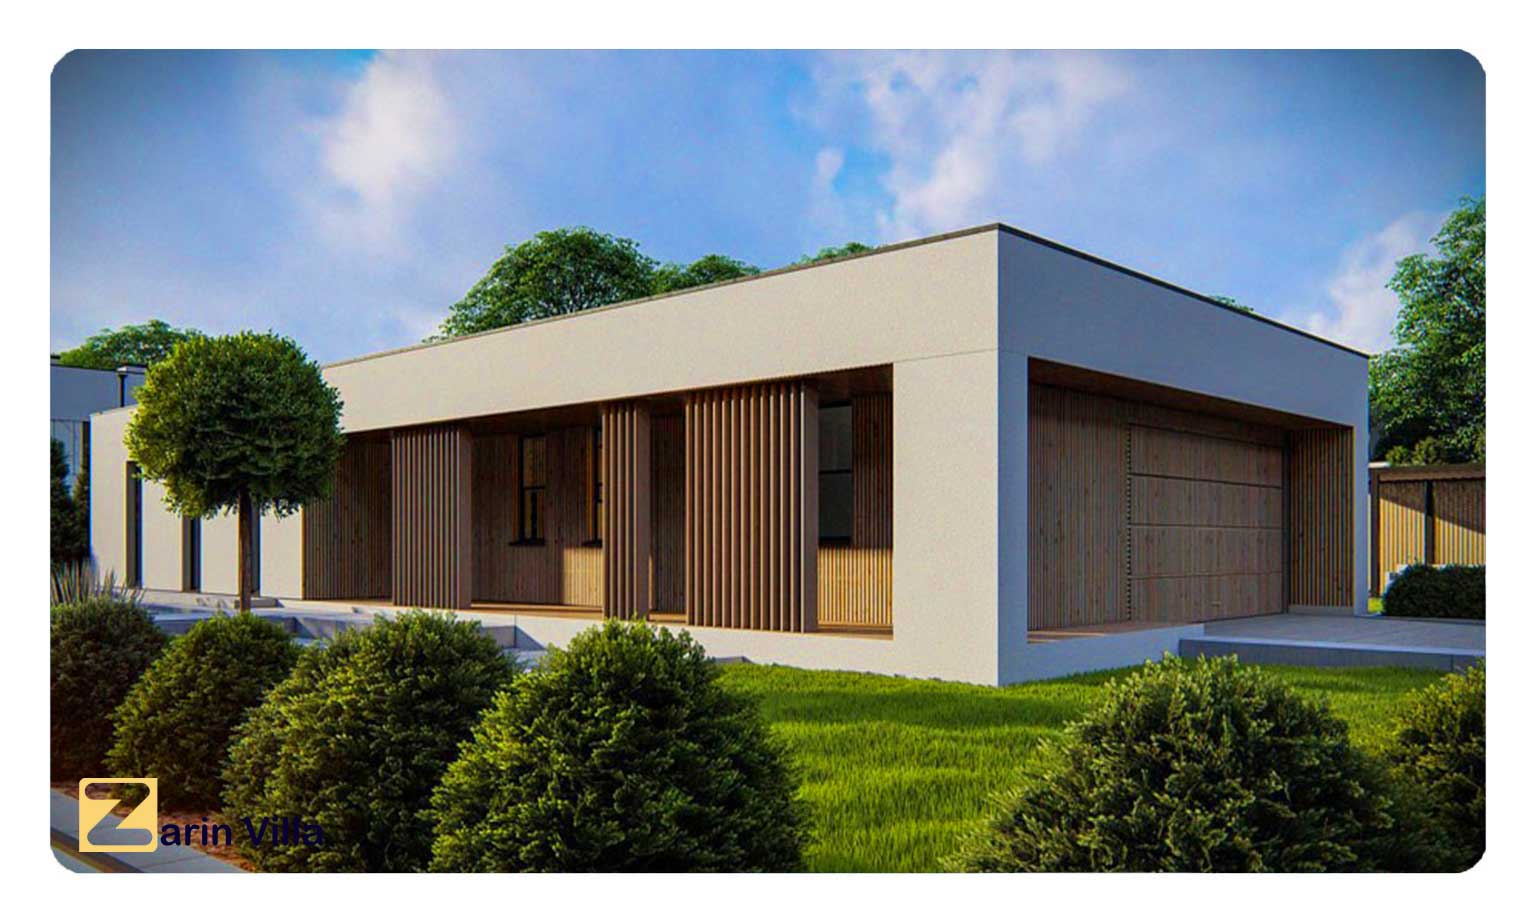 The price of a 60-meter prefabricated house